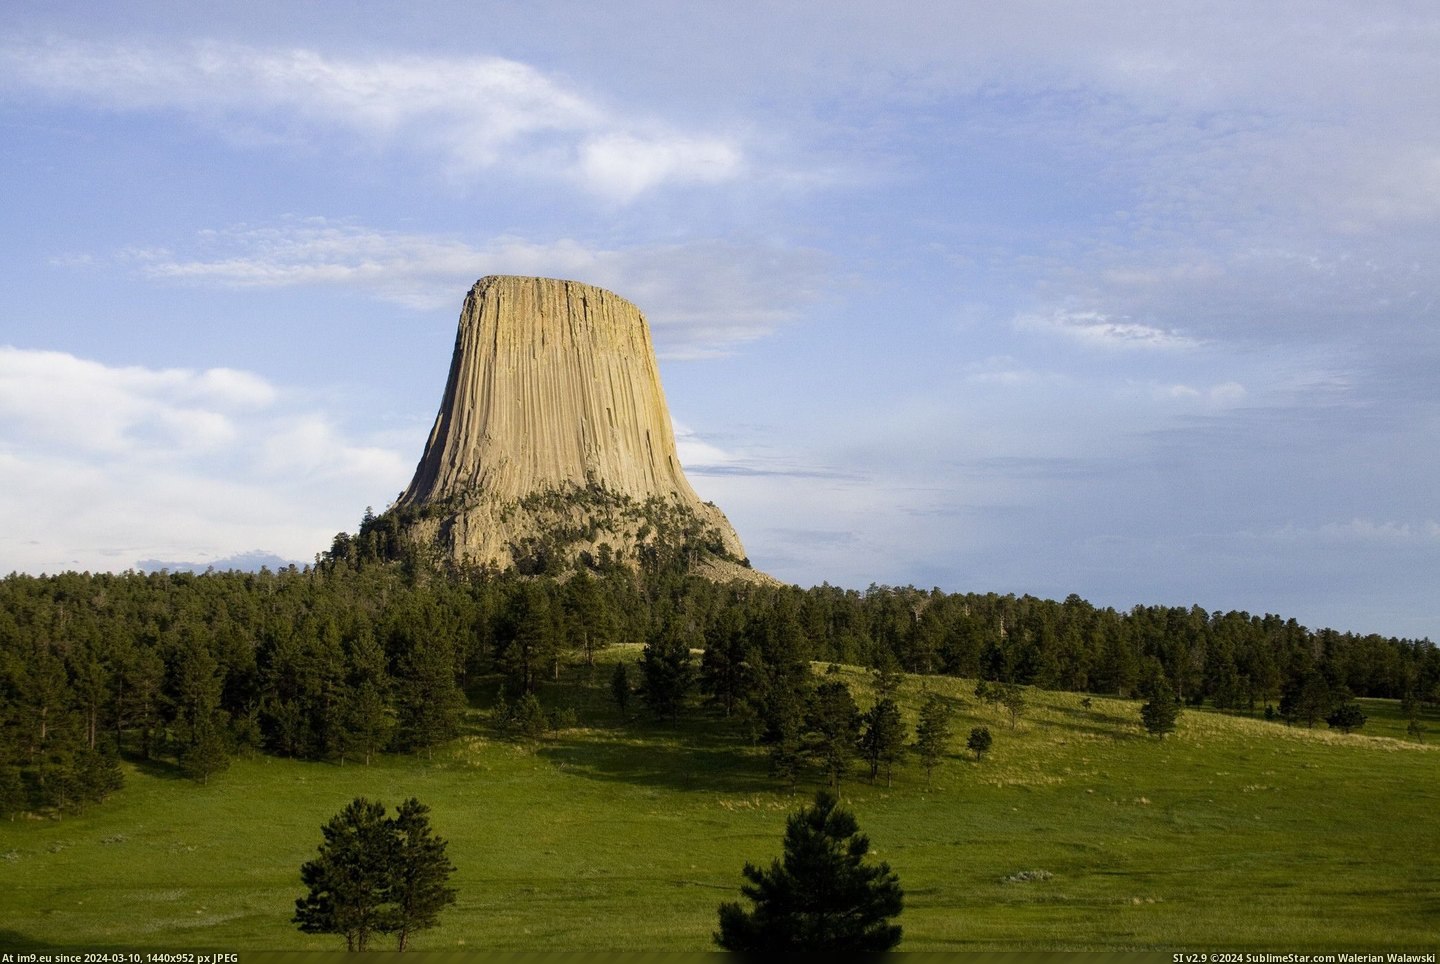 #Black #Tower #Wyoming #2100x1400 #Devil #Hills [Earthporn] Devil's Tower - Black Hills, Wyoming [2100x1400] Pic. (Obraz z album My r/EARTHPORN favs))